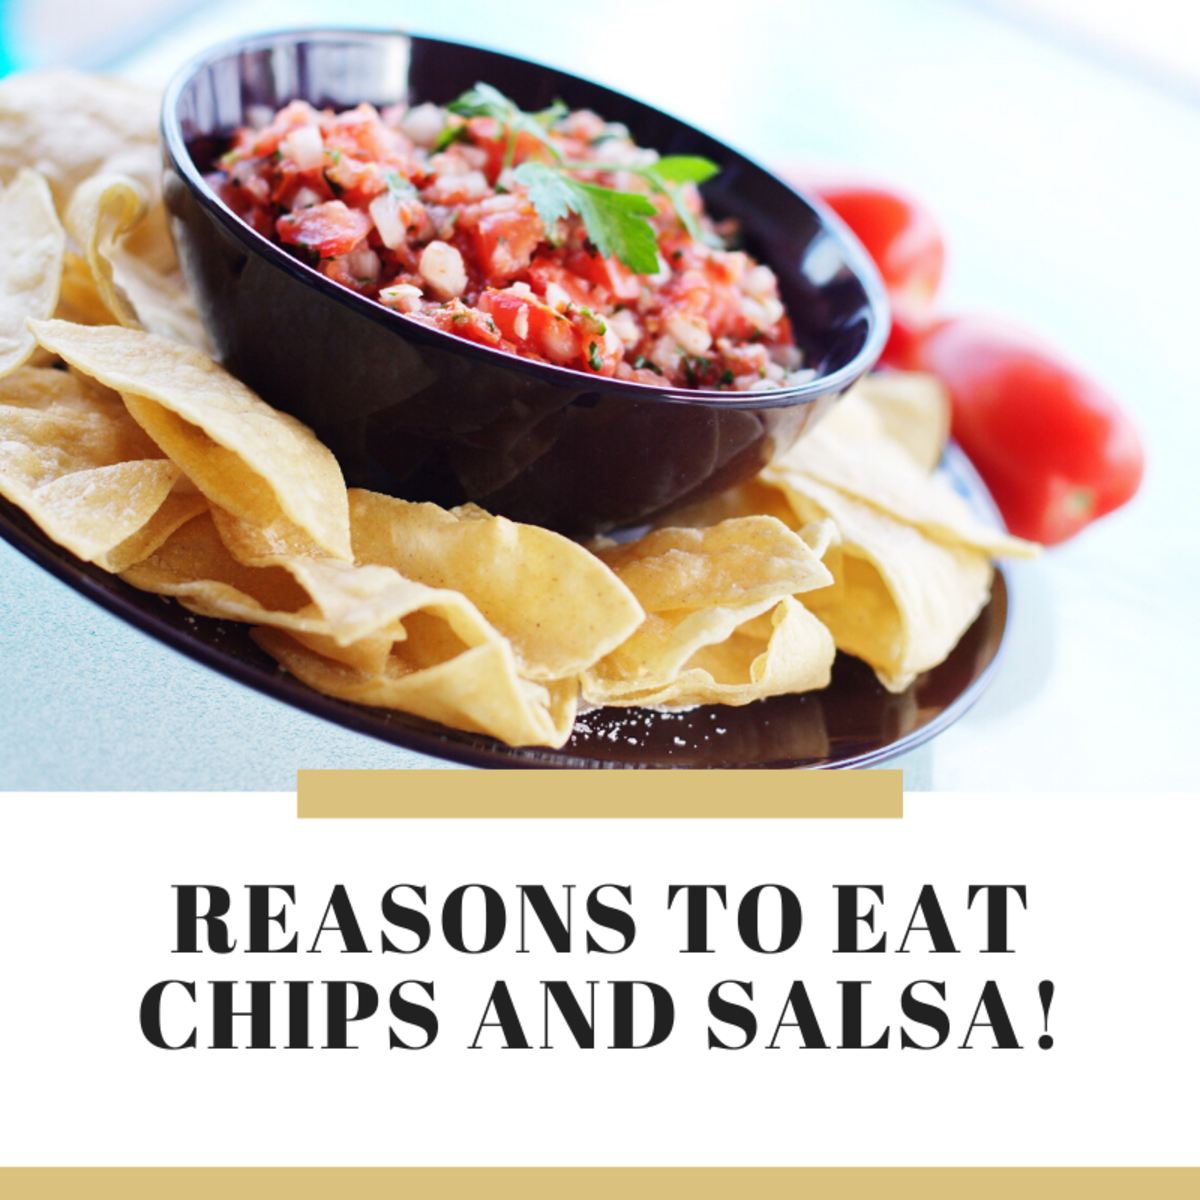 7 Reasons to Eat Chips and Salsa